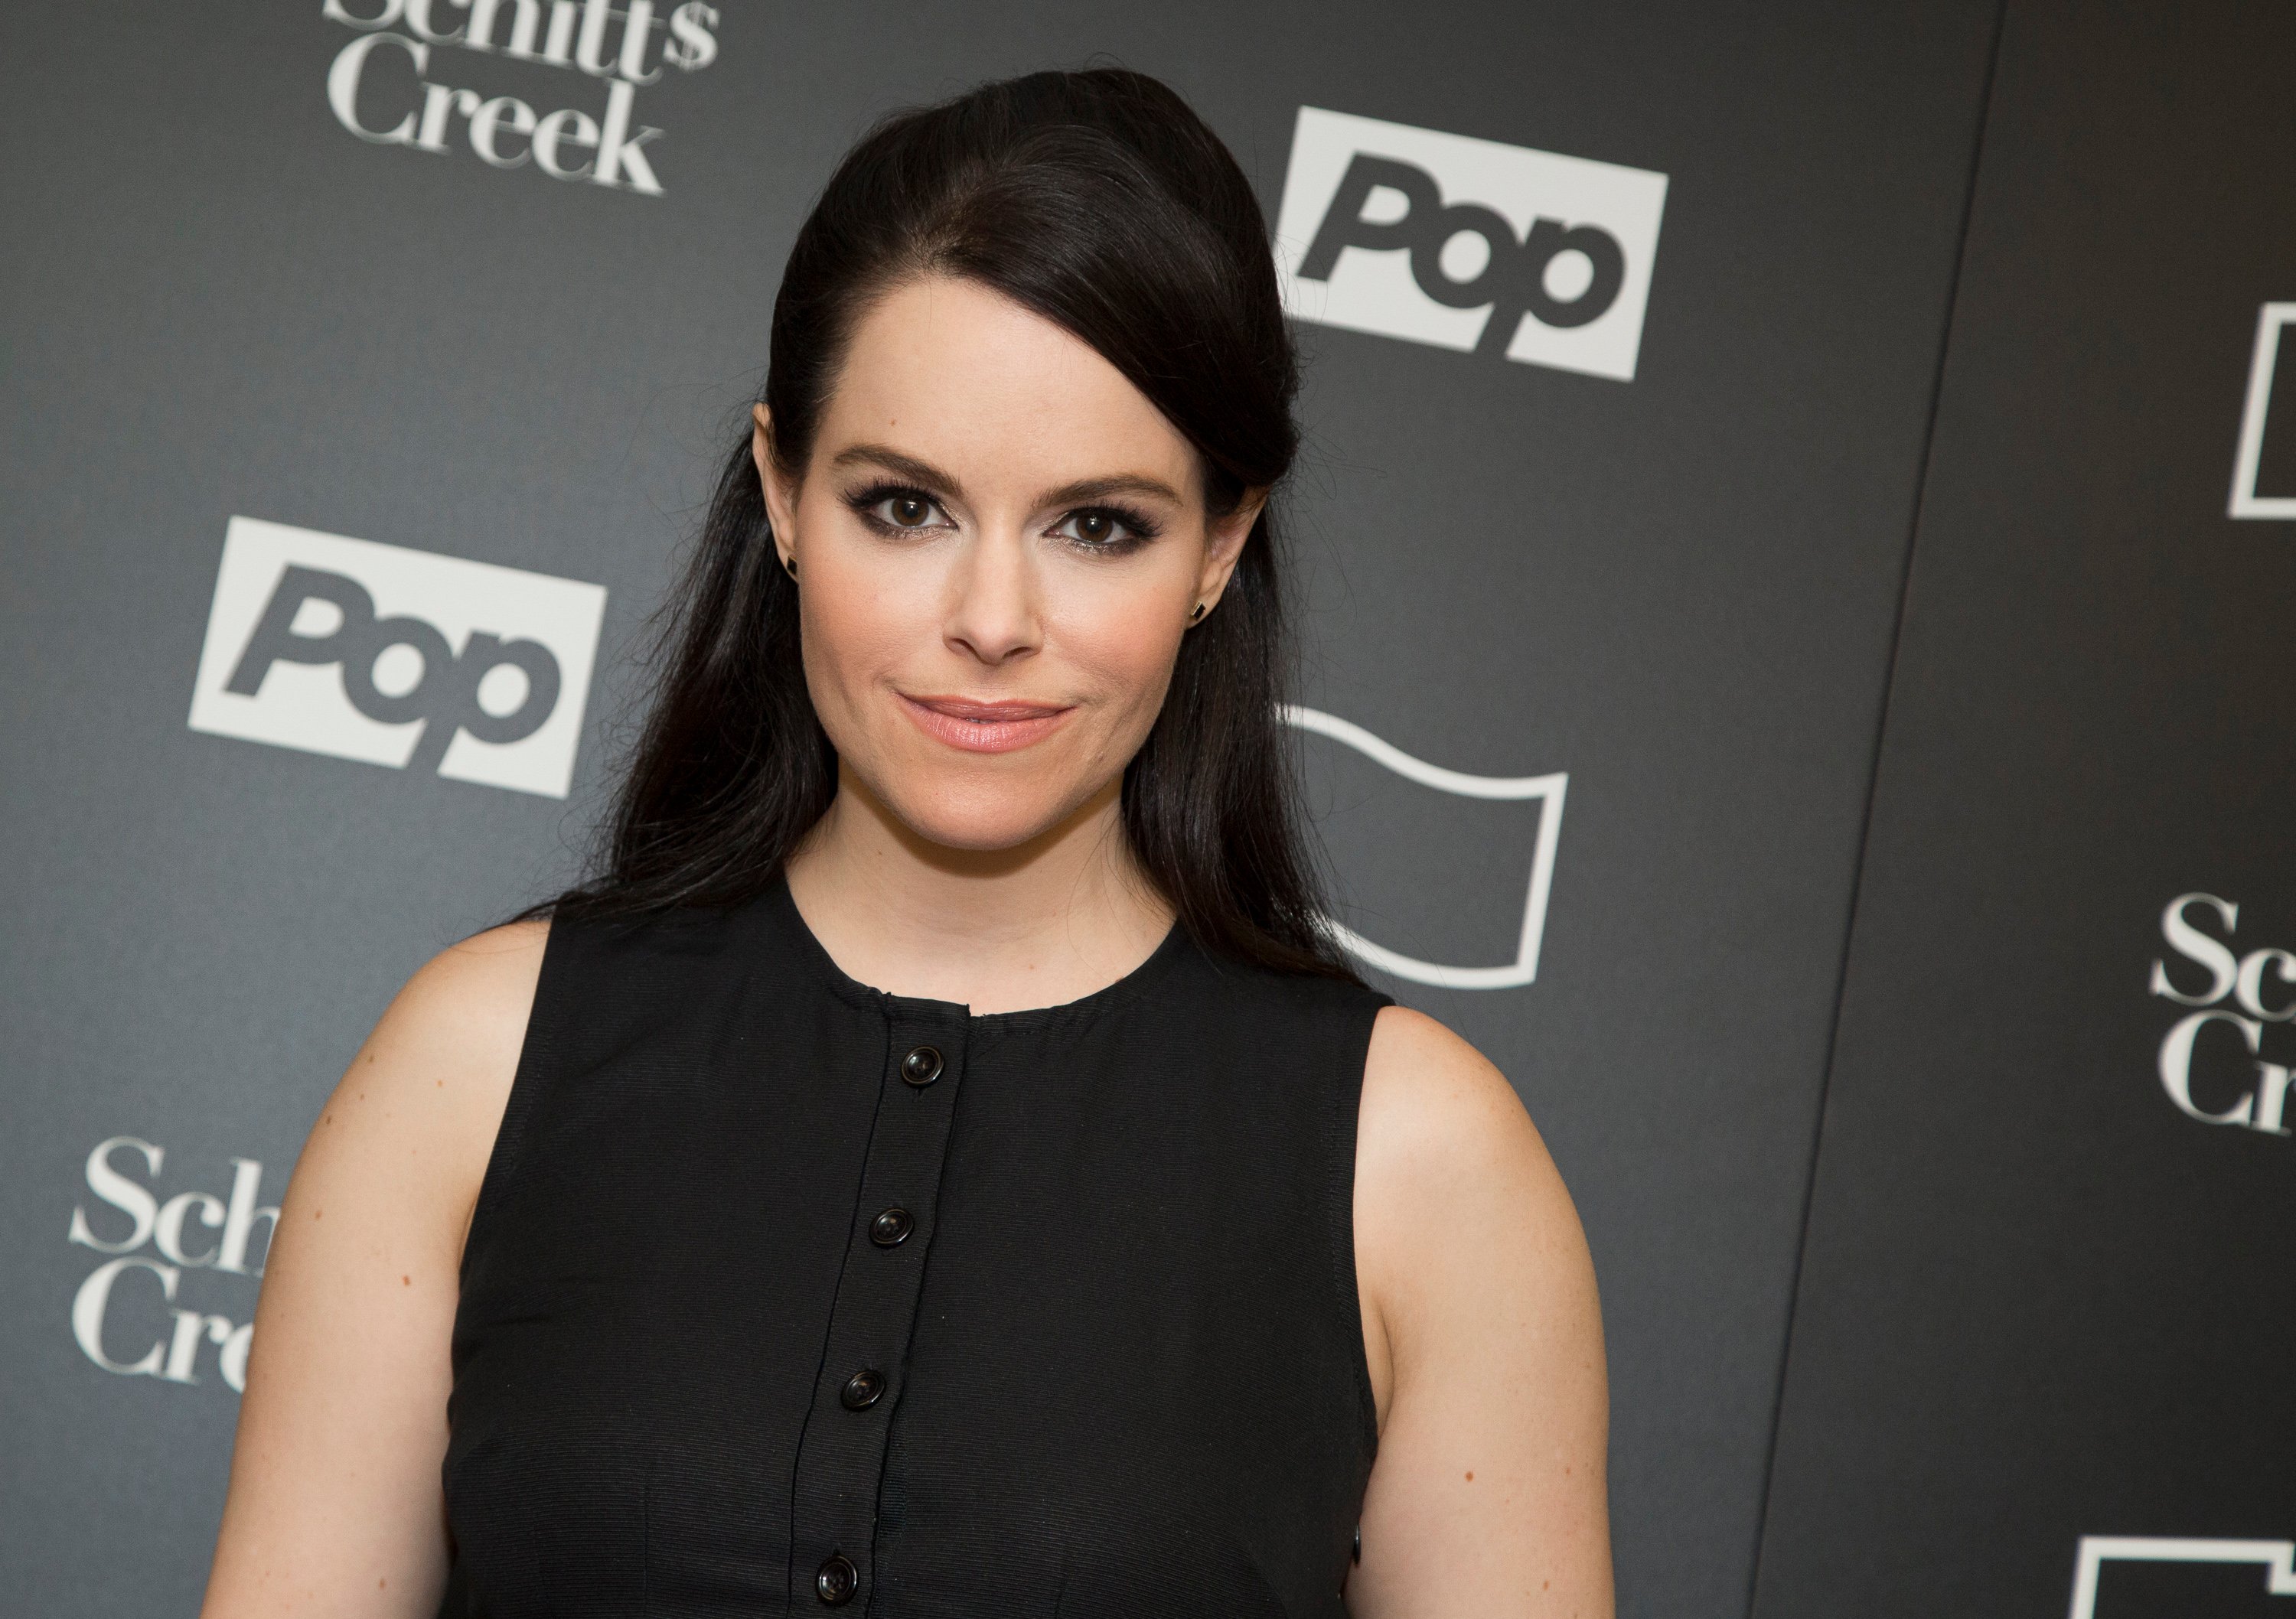 ‘Schitt’s Creek’: The Best Advice Emily Hampshire Got on Set Came From a Character, Not a Co-Star [Exclusive]